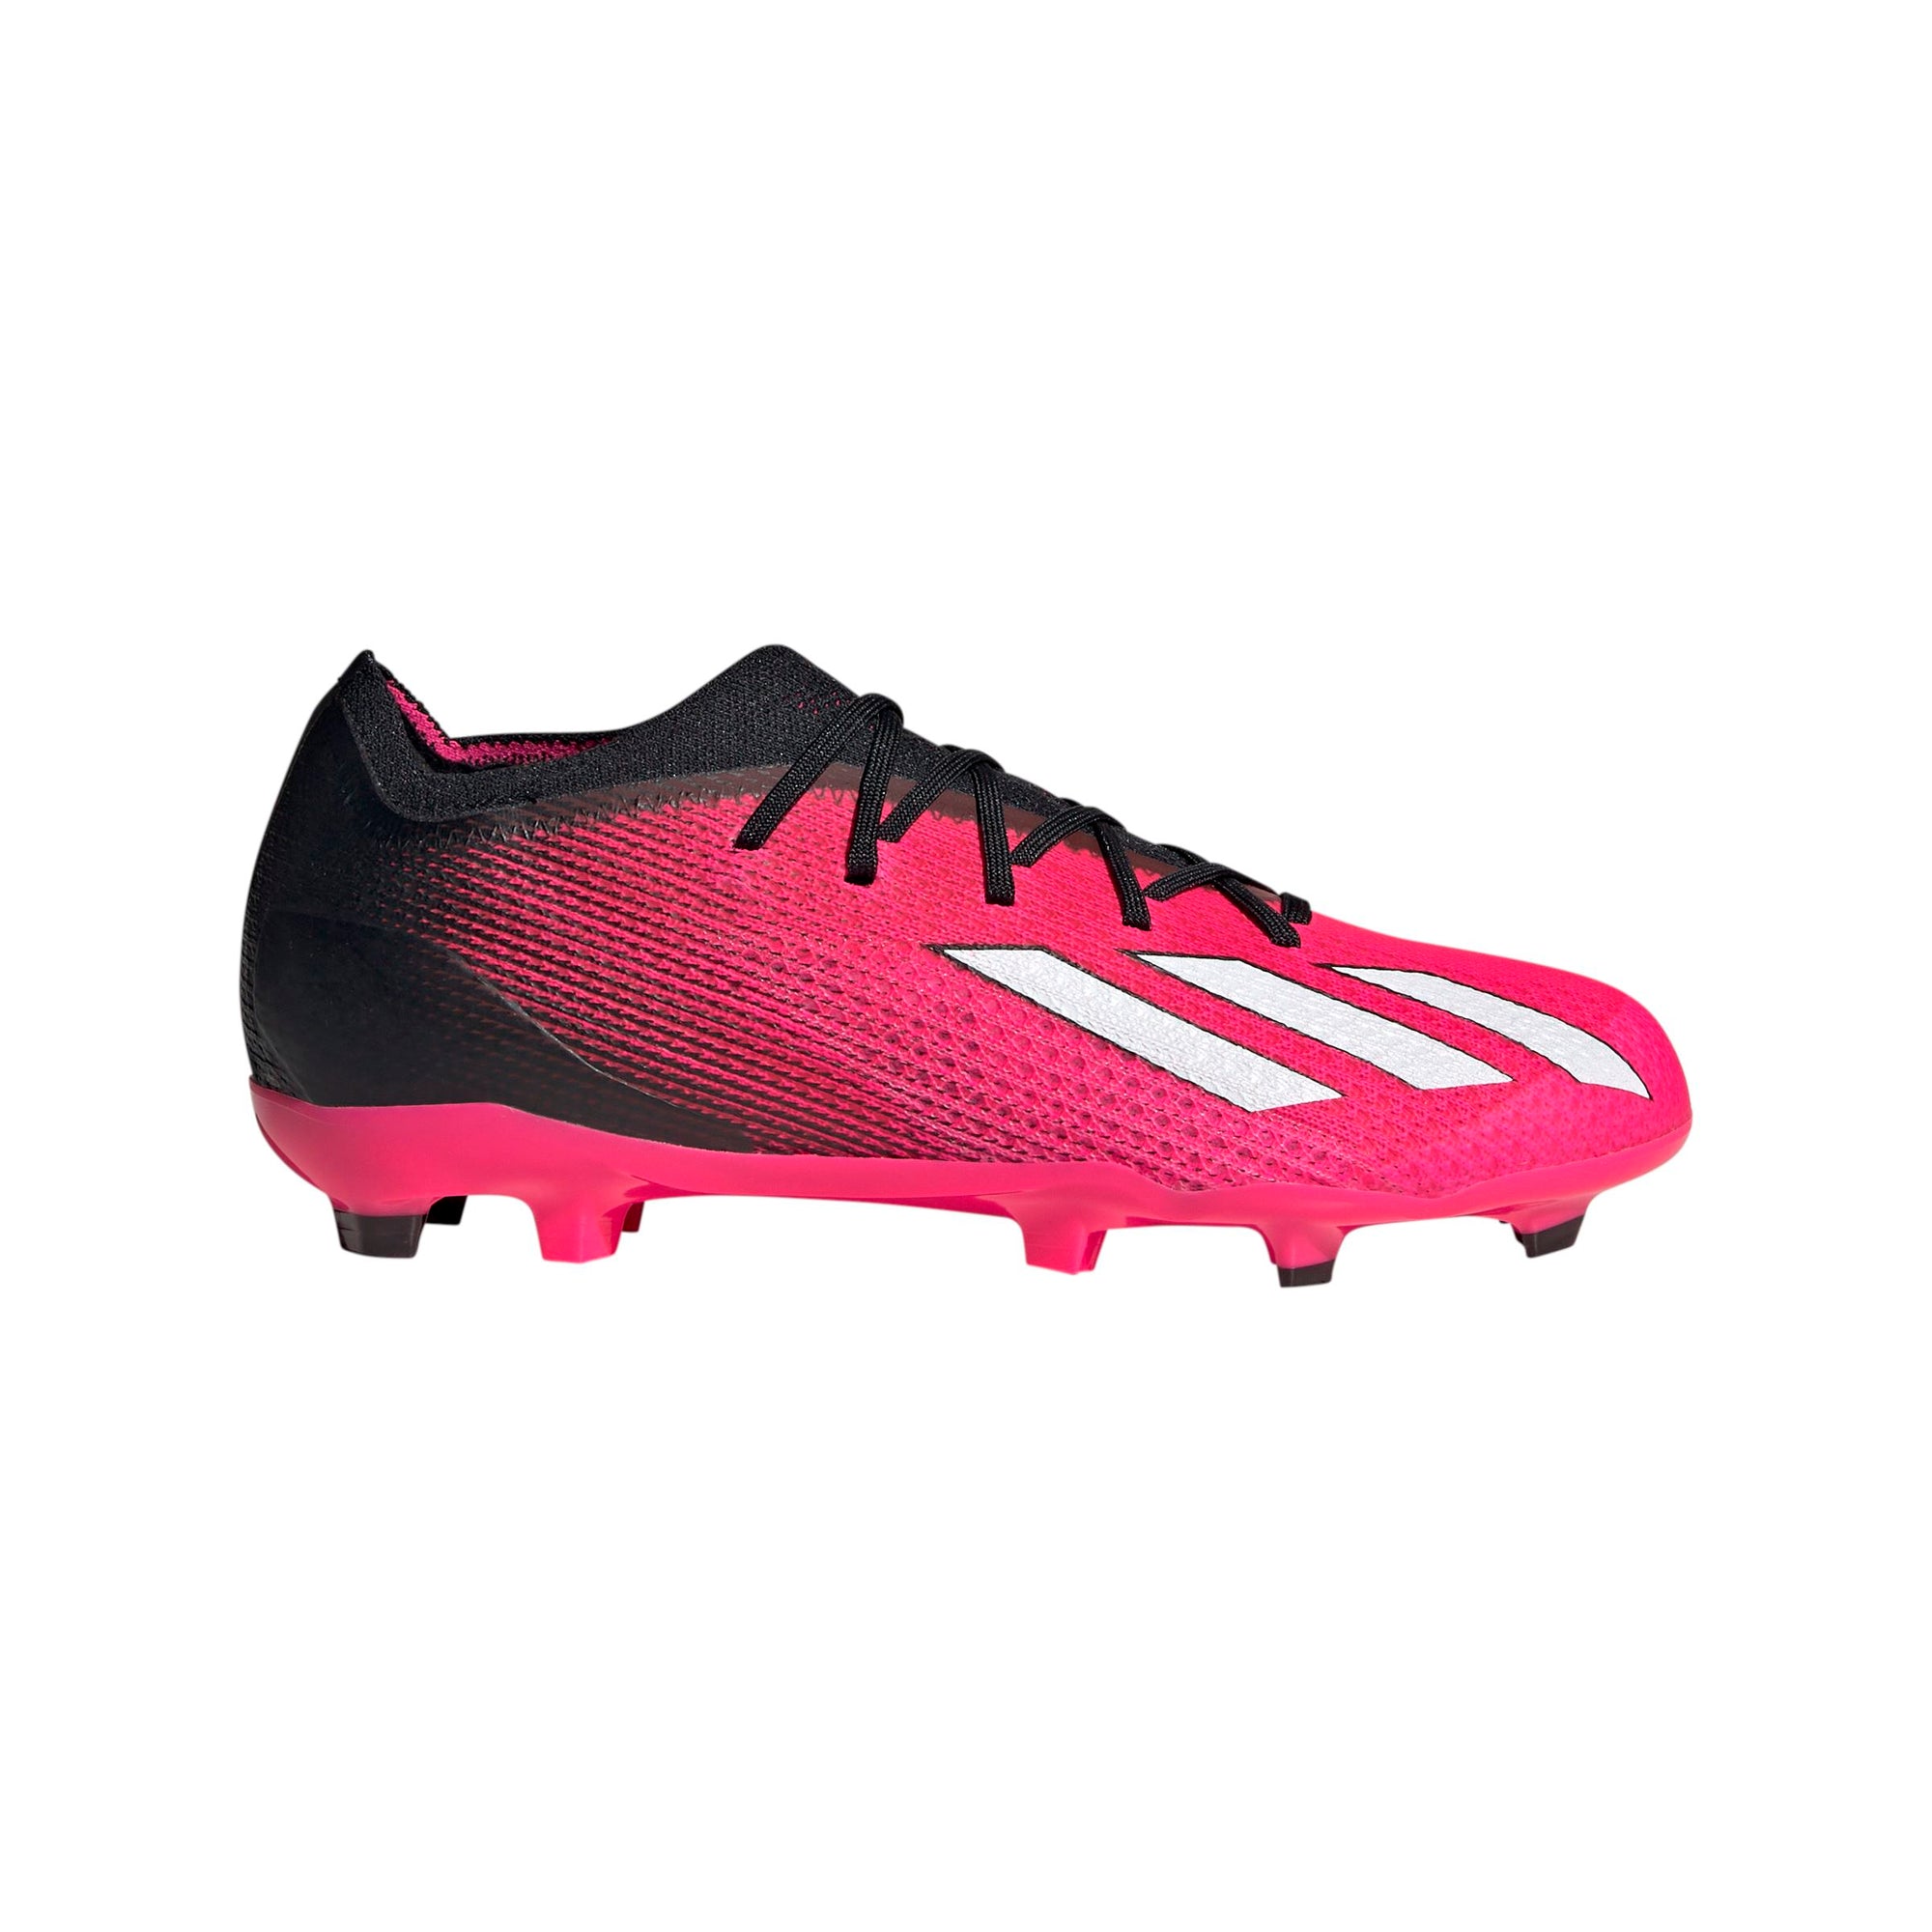 adidas Youth X Speedportal.1 Firm Ground Soccer Cleats | GZ5102 Cleats Adidas 1 Team Shock Pink 2 / FTWR White / Core Black 